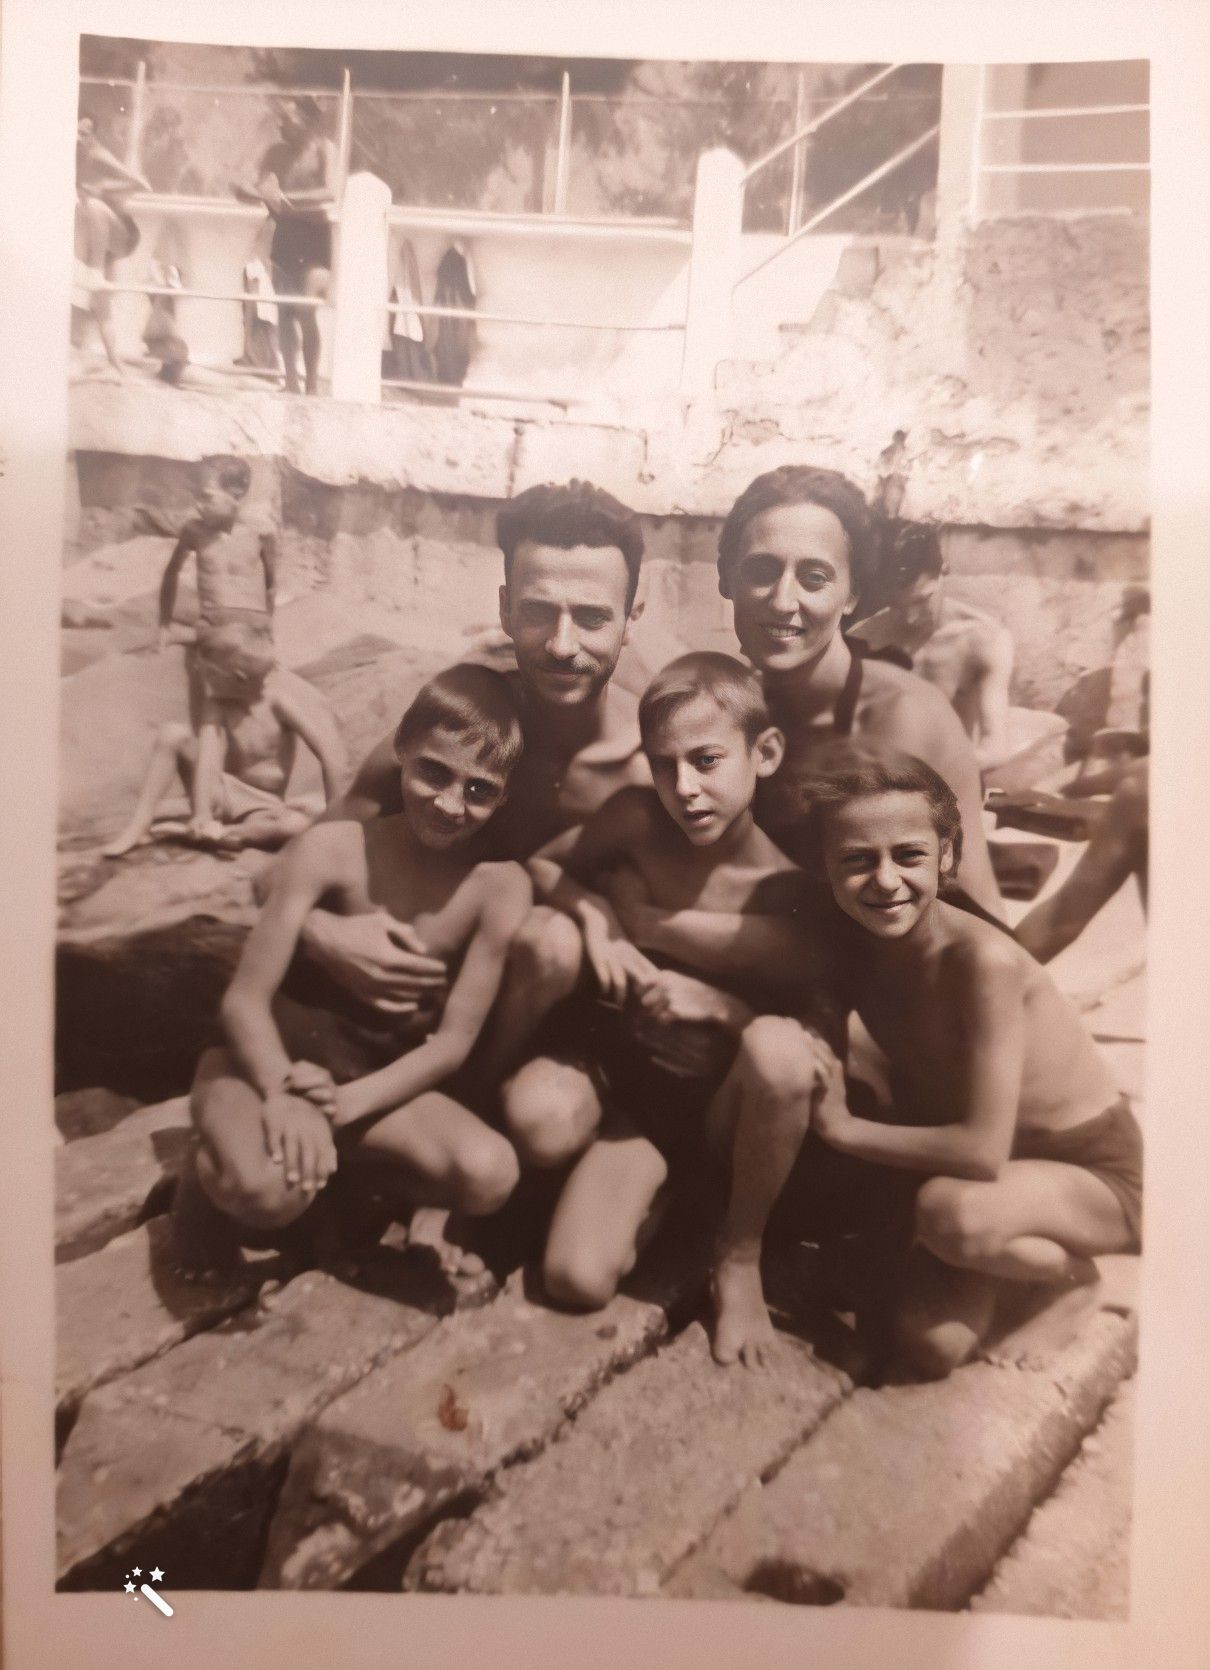 Daniele and family (photo enhanced by MyHeritage)